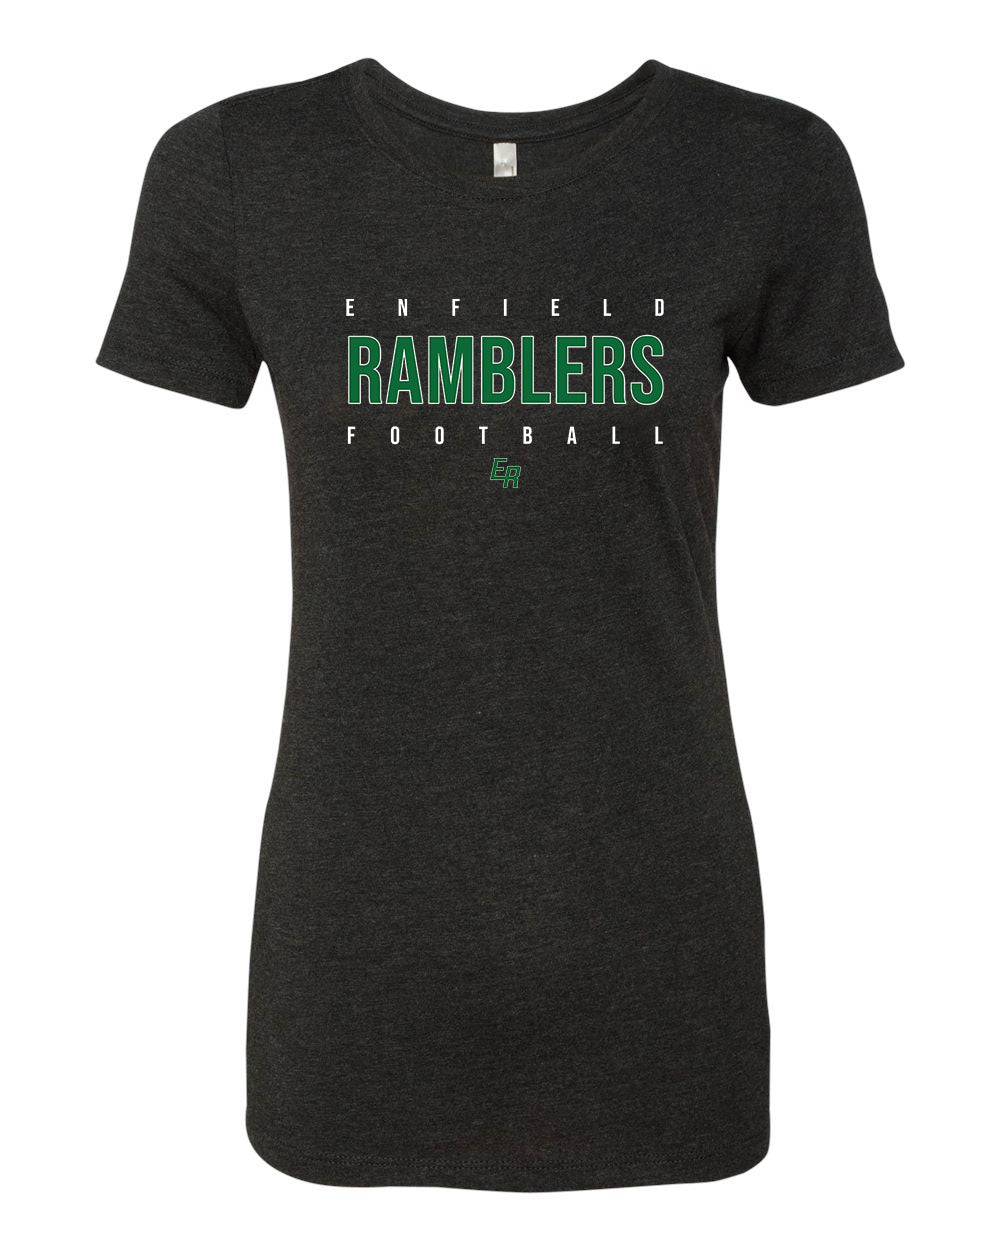 Ramblers Women's Next Level Tri-Blend "Ramblers Football" - 6710 (color options available)